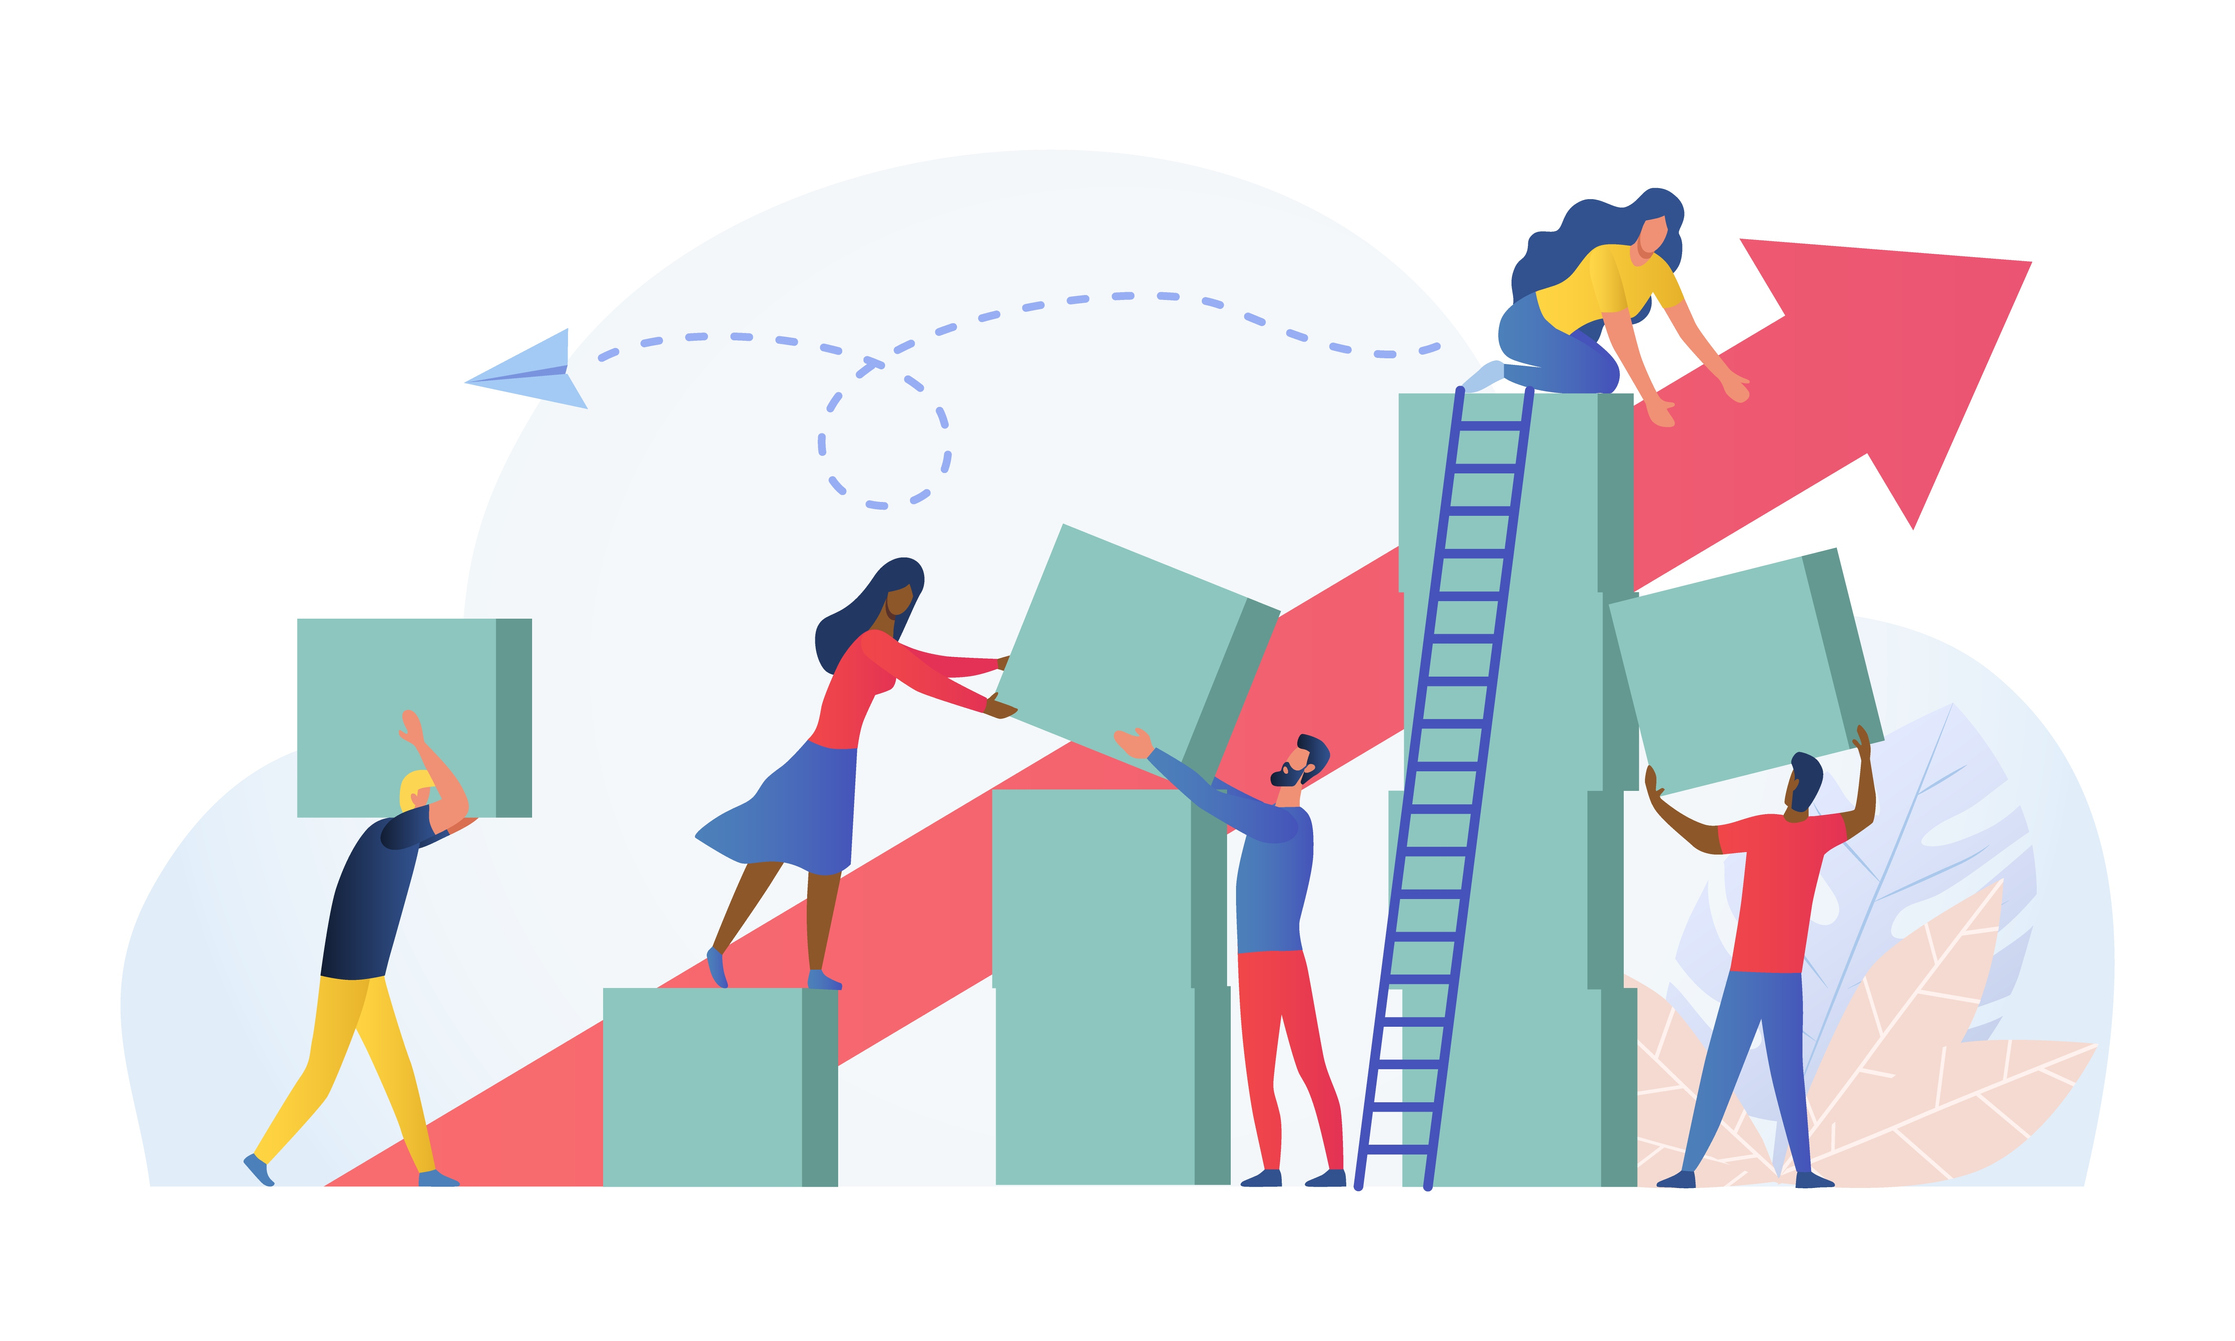 Composition with group of multiracial employees, managers or office workers moving boxes to assemble towers. Concept of teamwork, team building and building successful business. Vector illustration.